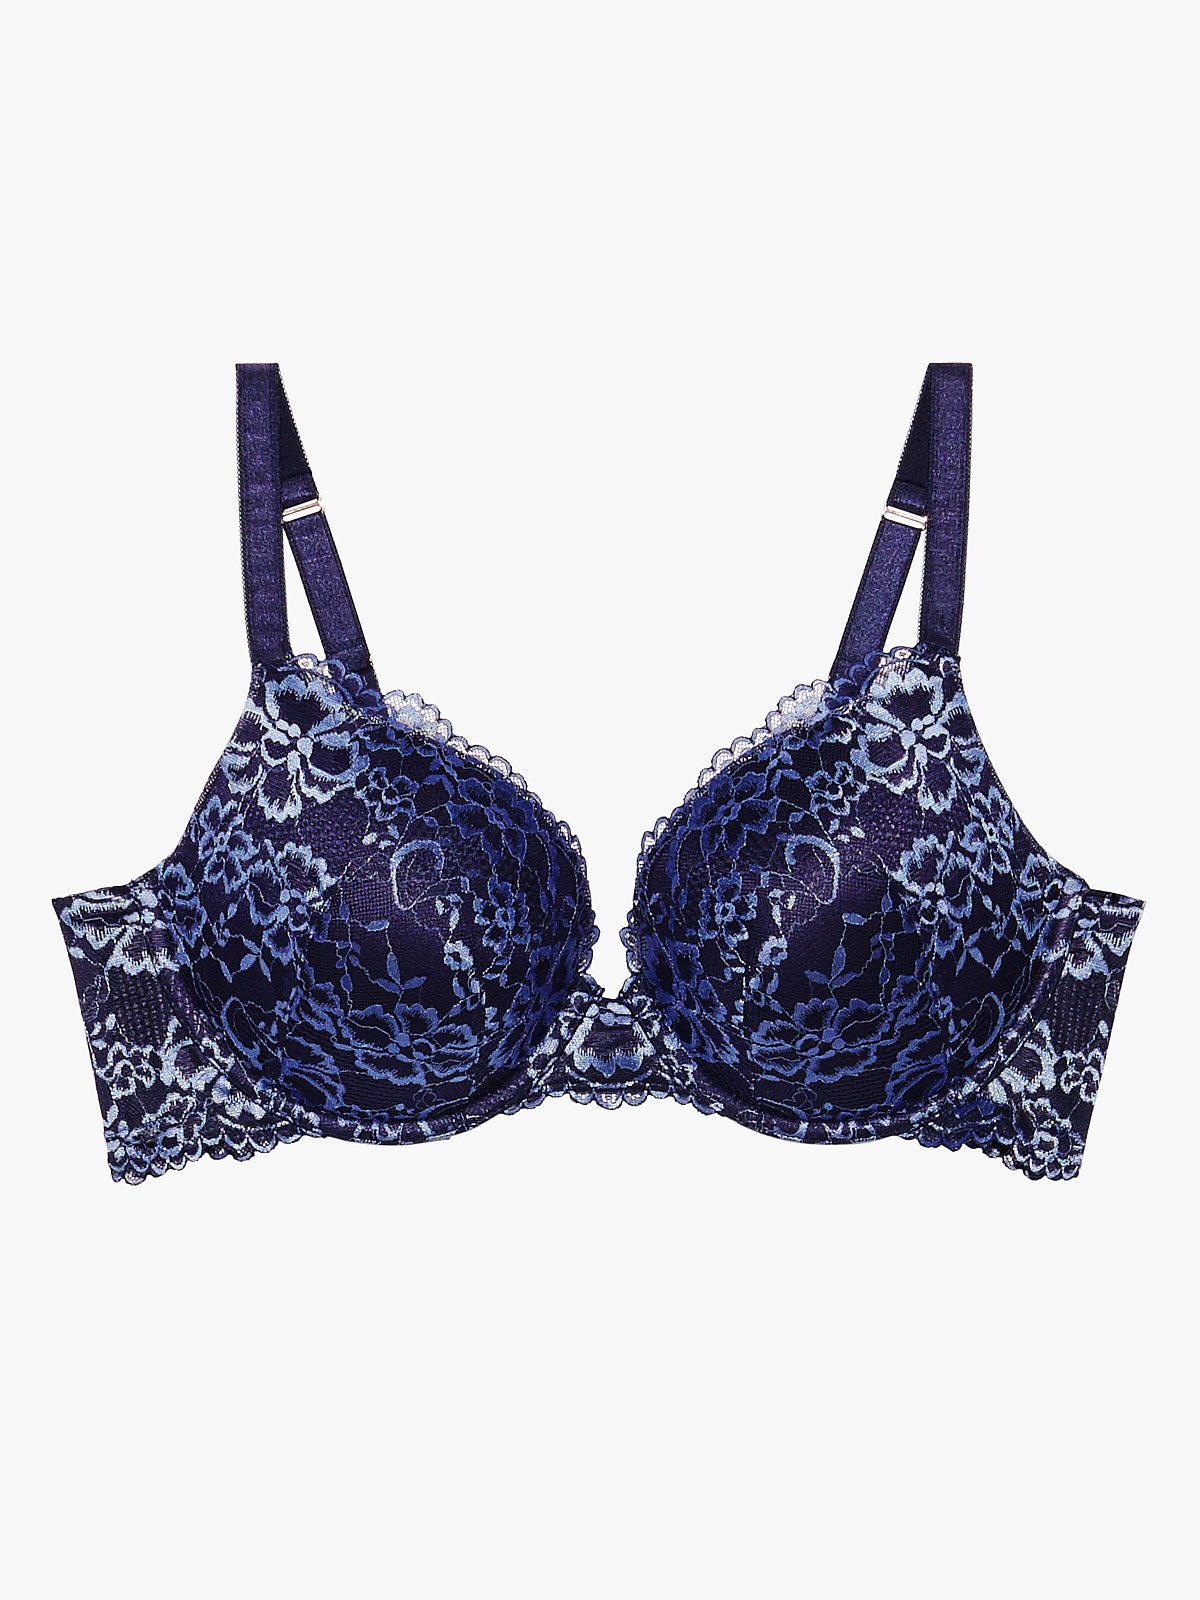 Savage x Fenty Floral Lace Racerback Bralette in Blue, We Found Love in  Savage x Fenty's First-Ever Bridal Drop — Shop the Pieces Right Now